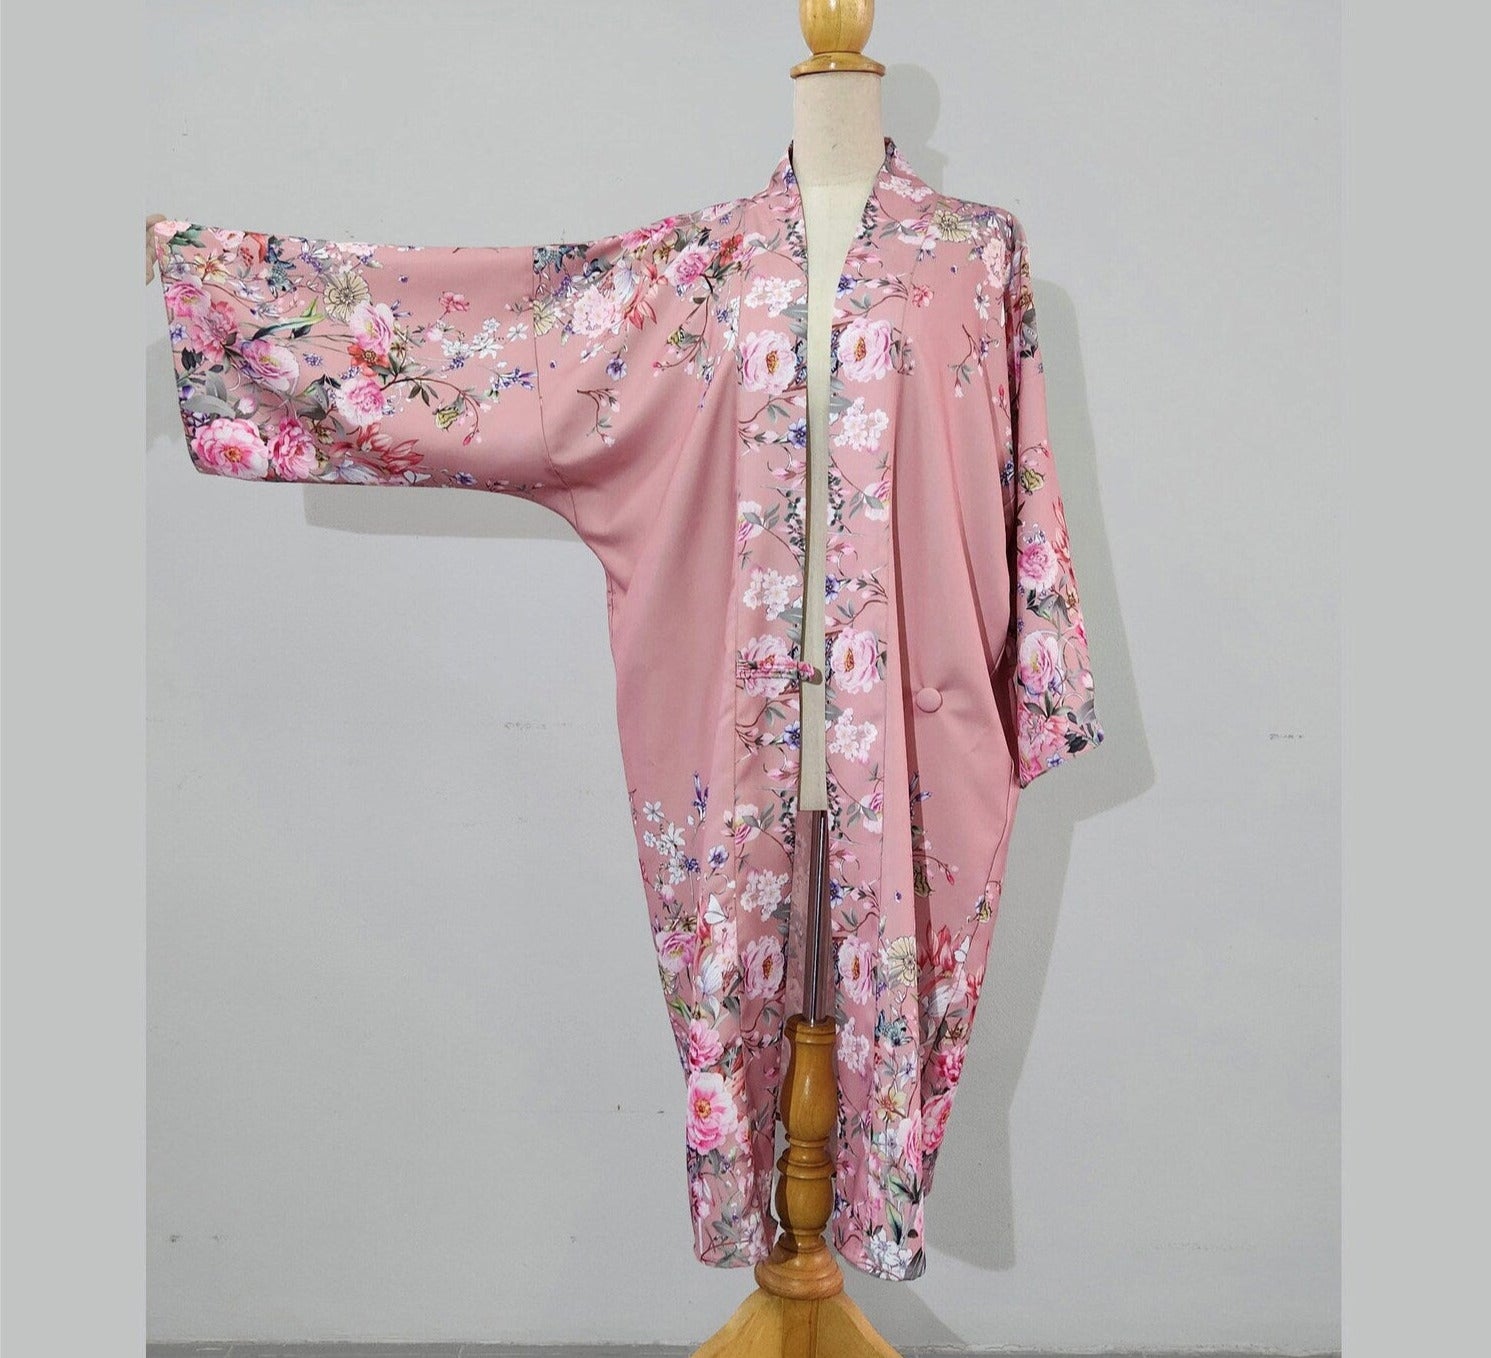 Mauve pink Japanese style and 1920s-inspired loungewear, a 1920s kimono robe